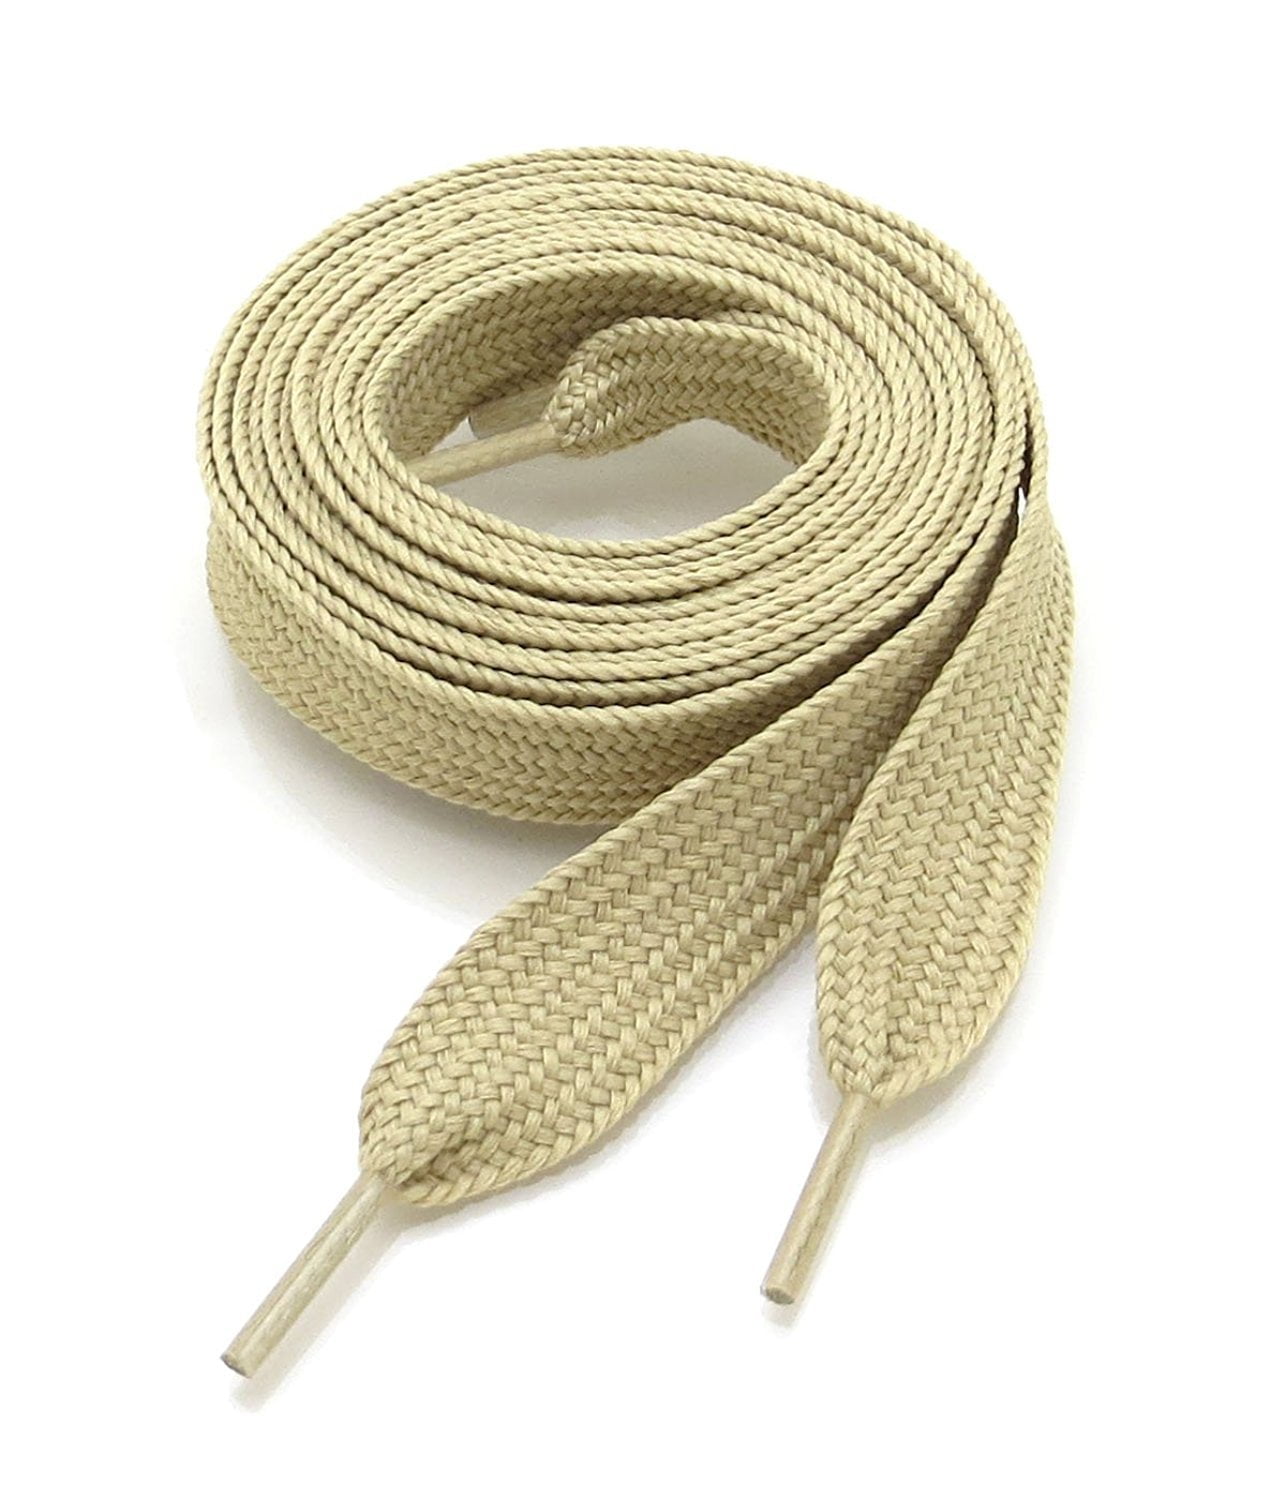 52" Thick Shoelace Sneakers Athletic Shoelace String Shoelaces Solid 1,2,12Pairs 